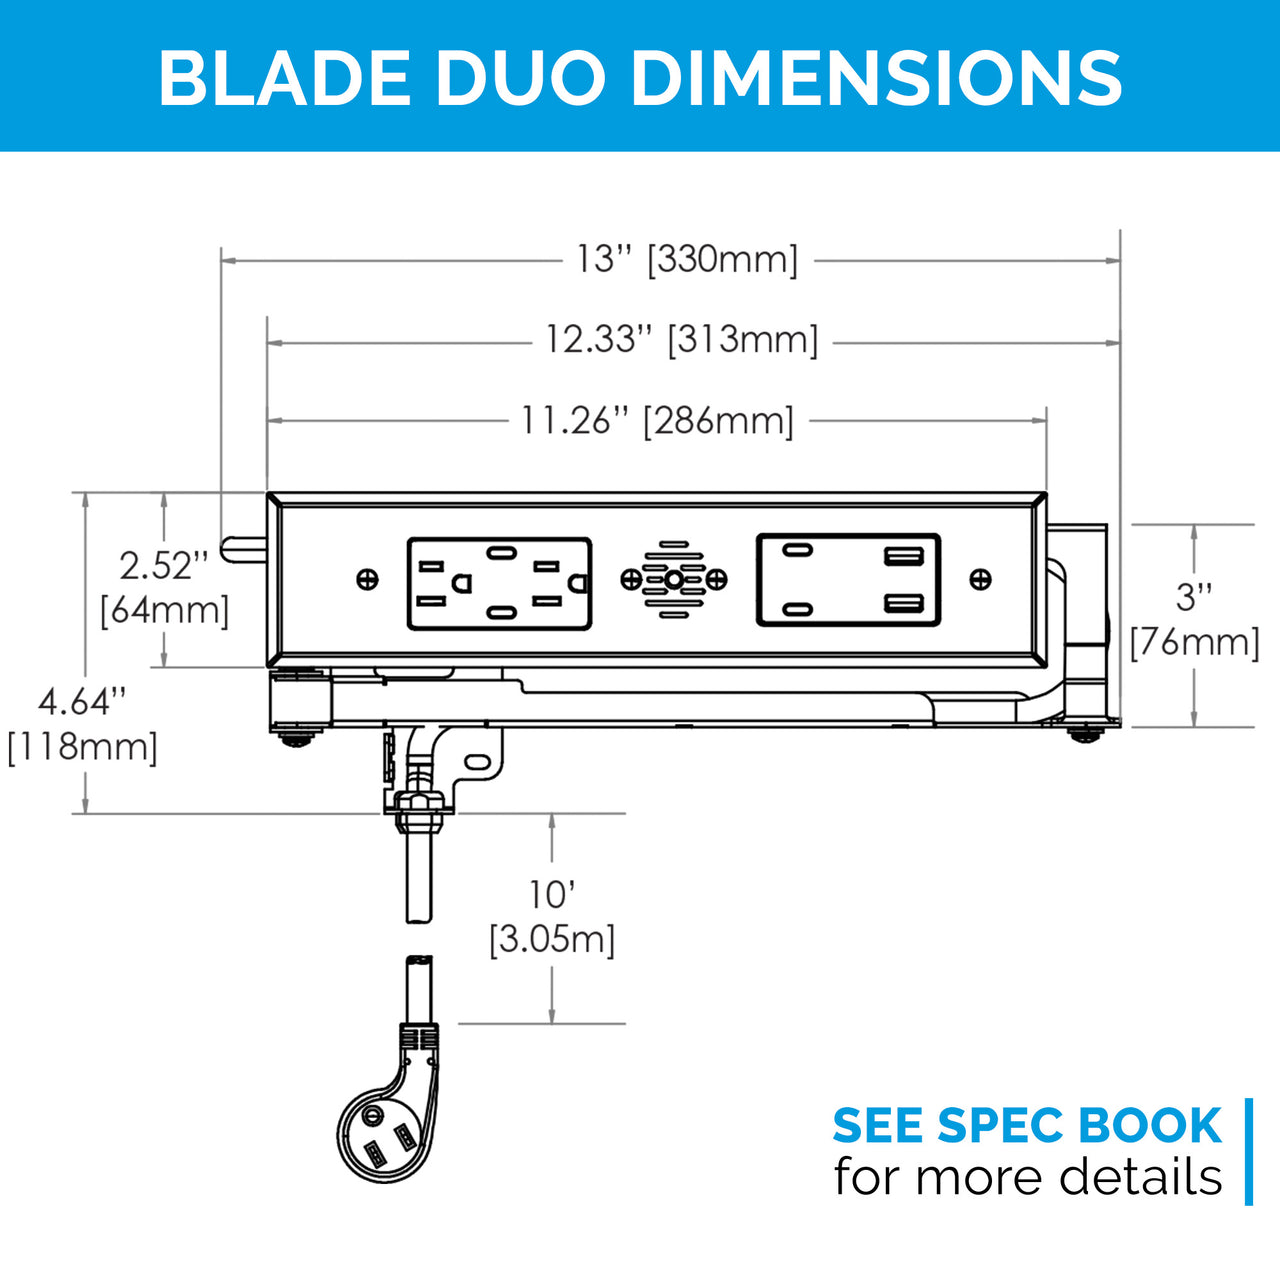 15 amp Blade Series with 10' Cords